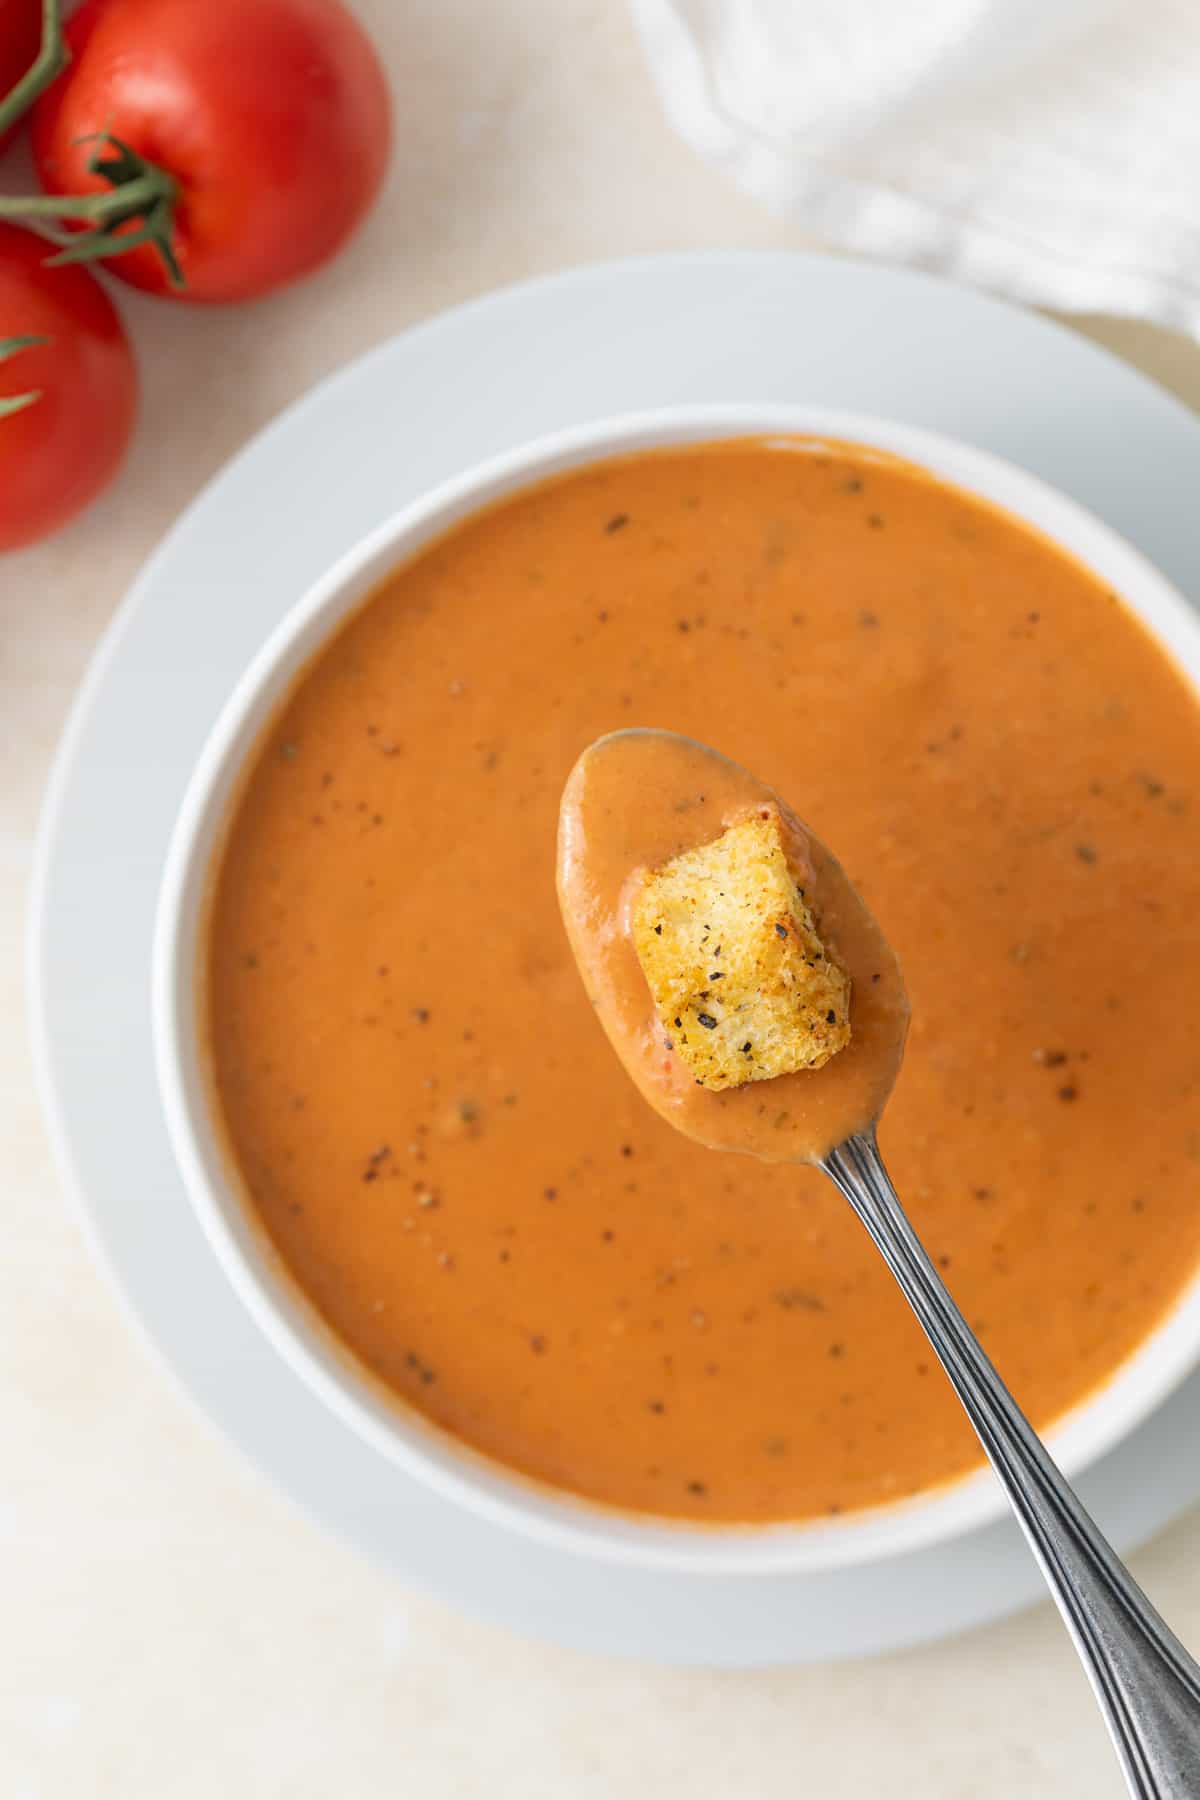 A spoonful of creamy tomato soup with a crouton over a bowl of the soup.